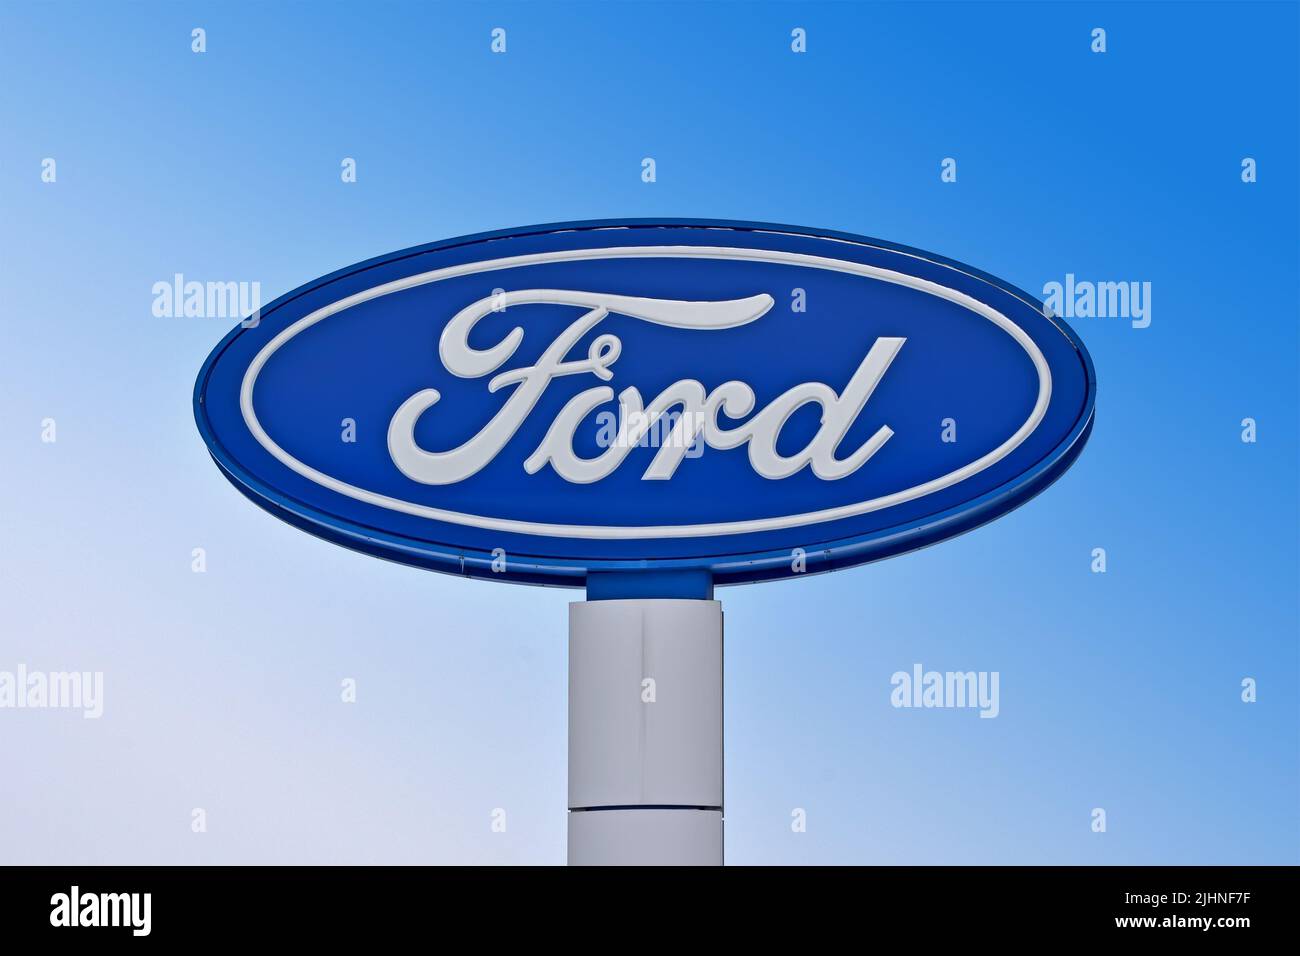 Ford logo Stock Photos, Royalty Free Ford logo Images